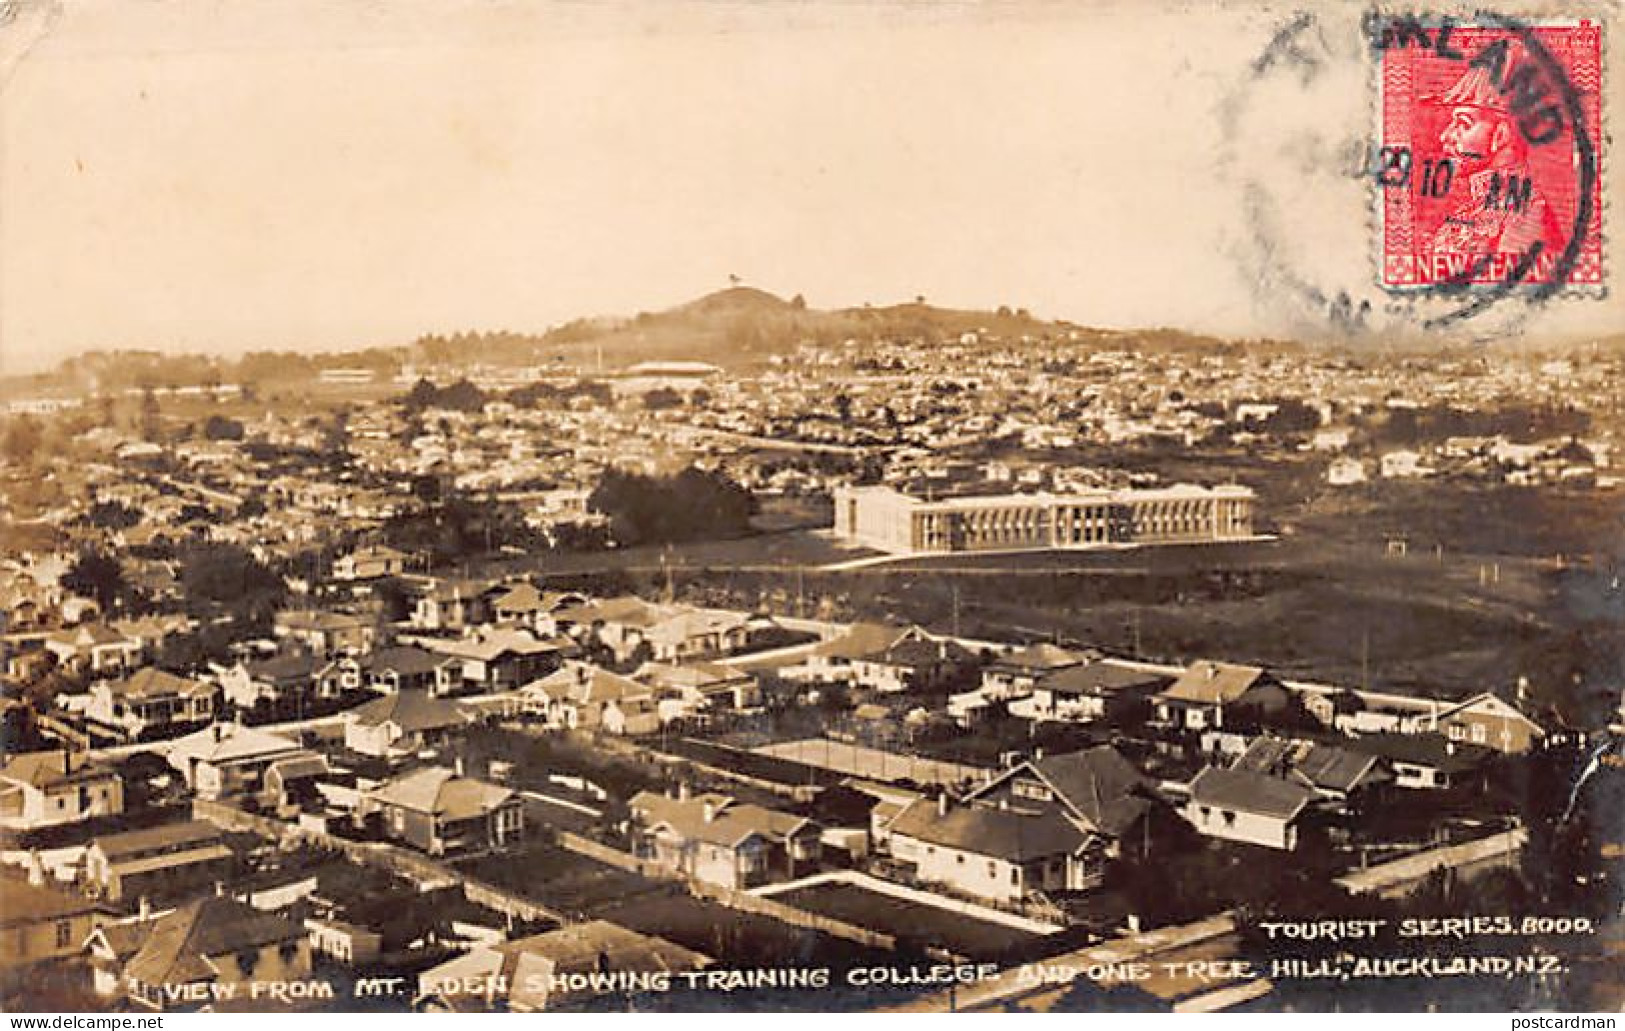 New Zealand - AUCKLAND - View From Mt. Eden Showing Training College And One Tree Hill - REAL PHOTO - Publ. Frank Duncan - Neuseeland